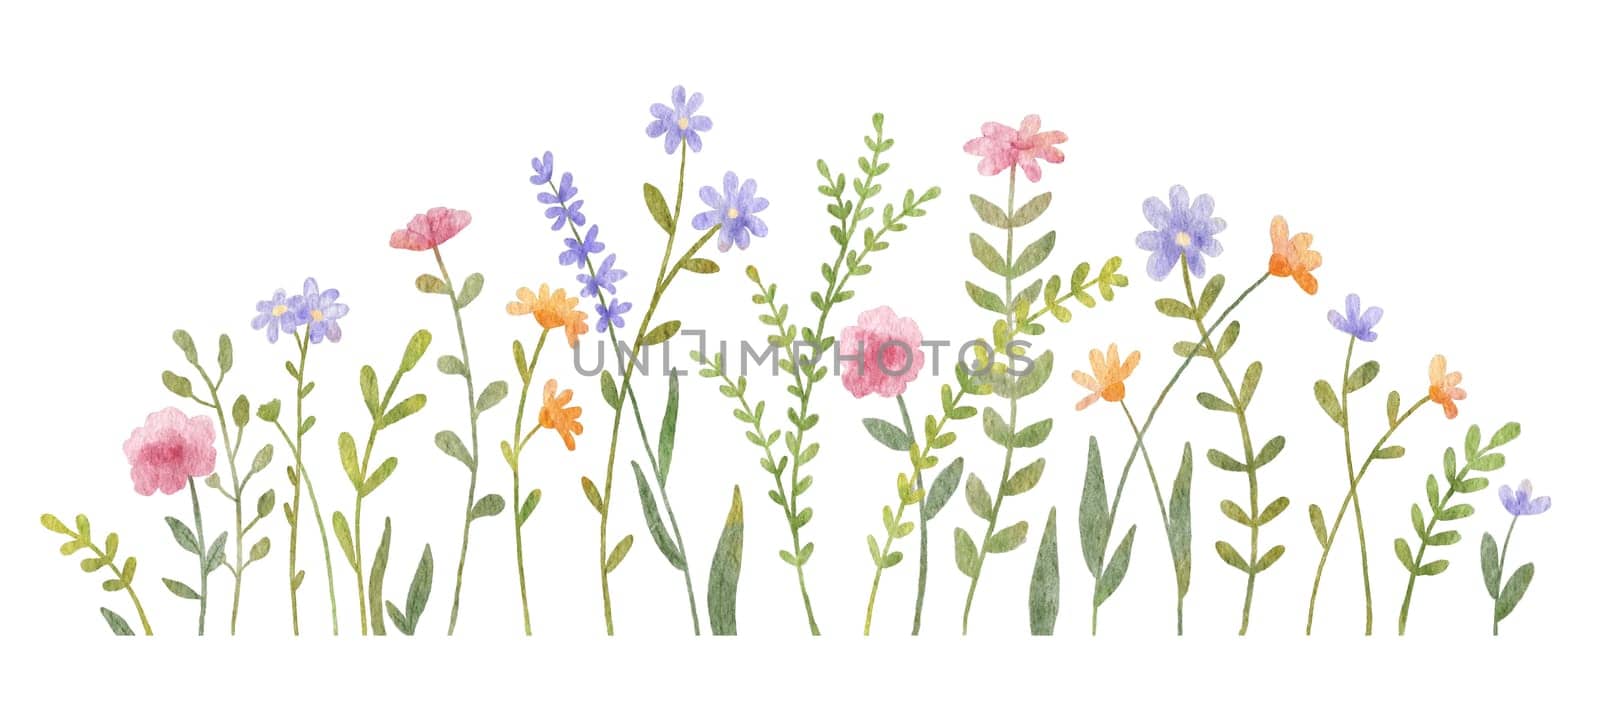 Watercolor wild herbs and flowers illustration. Hand painted meadow with grass and wildflowers isolated on white by ElenaPlatova